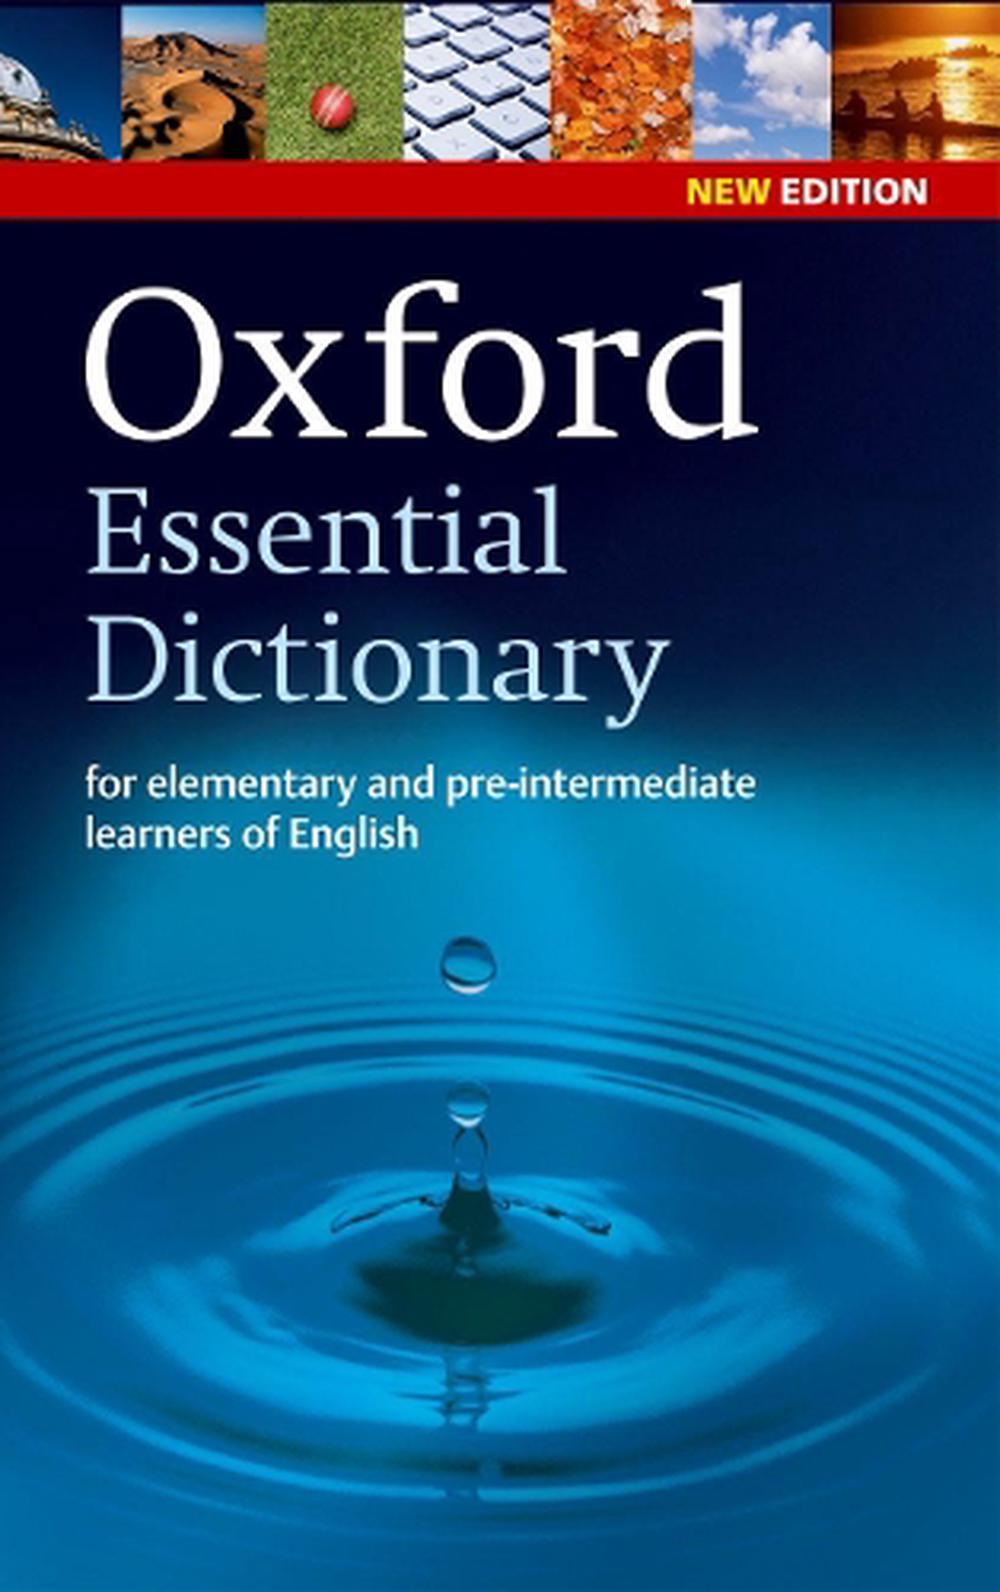 Oxford Essential Dictionary, New Edition by Oxford Dictionary